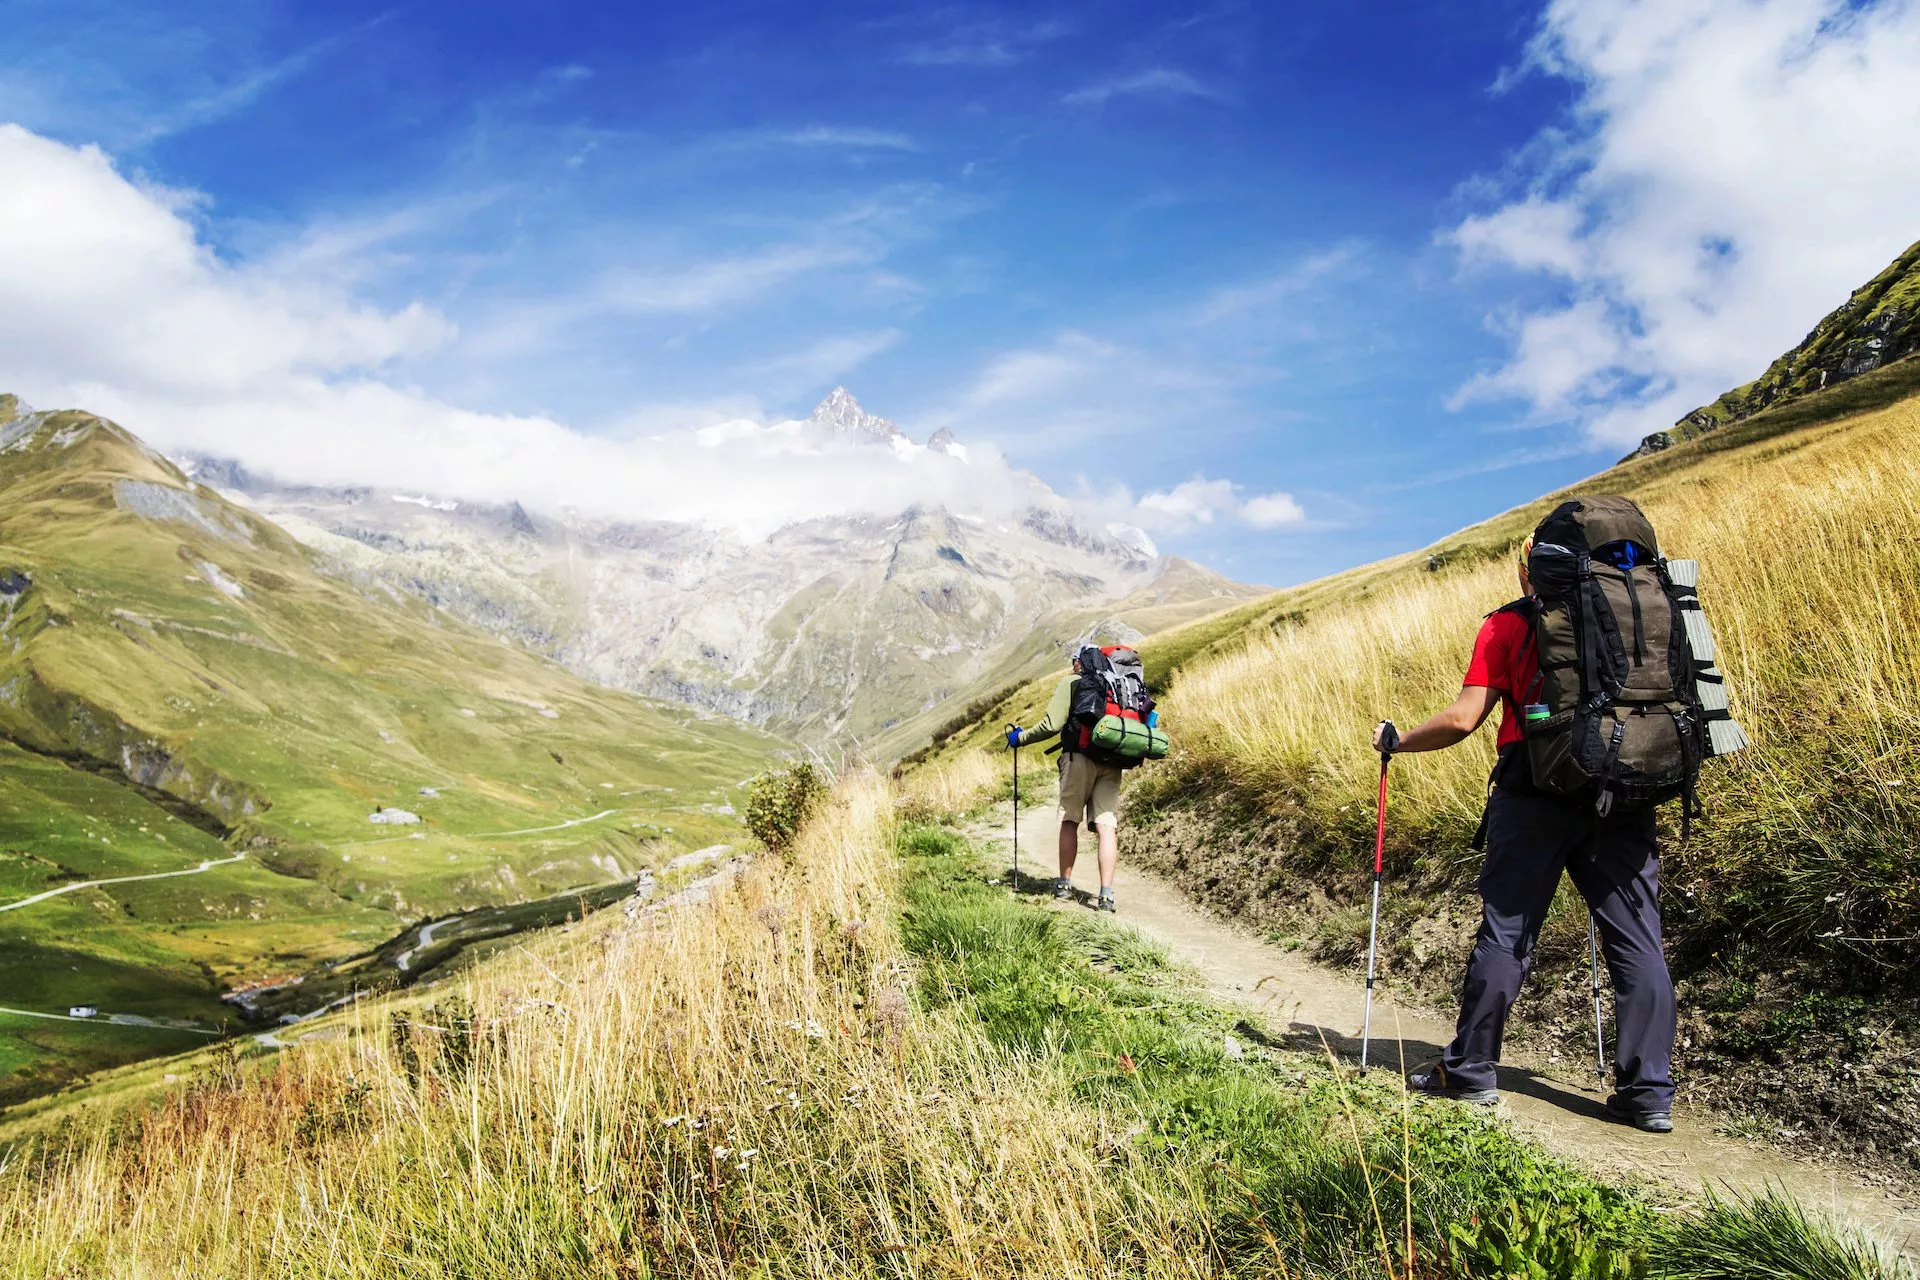 Tour du Mont Blanc - What's it's Like to Hike